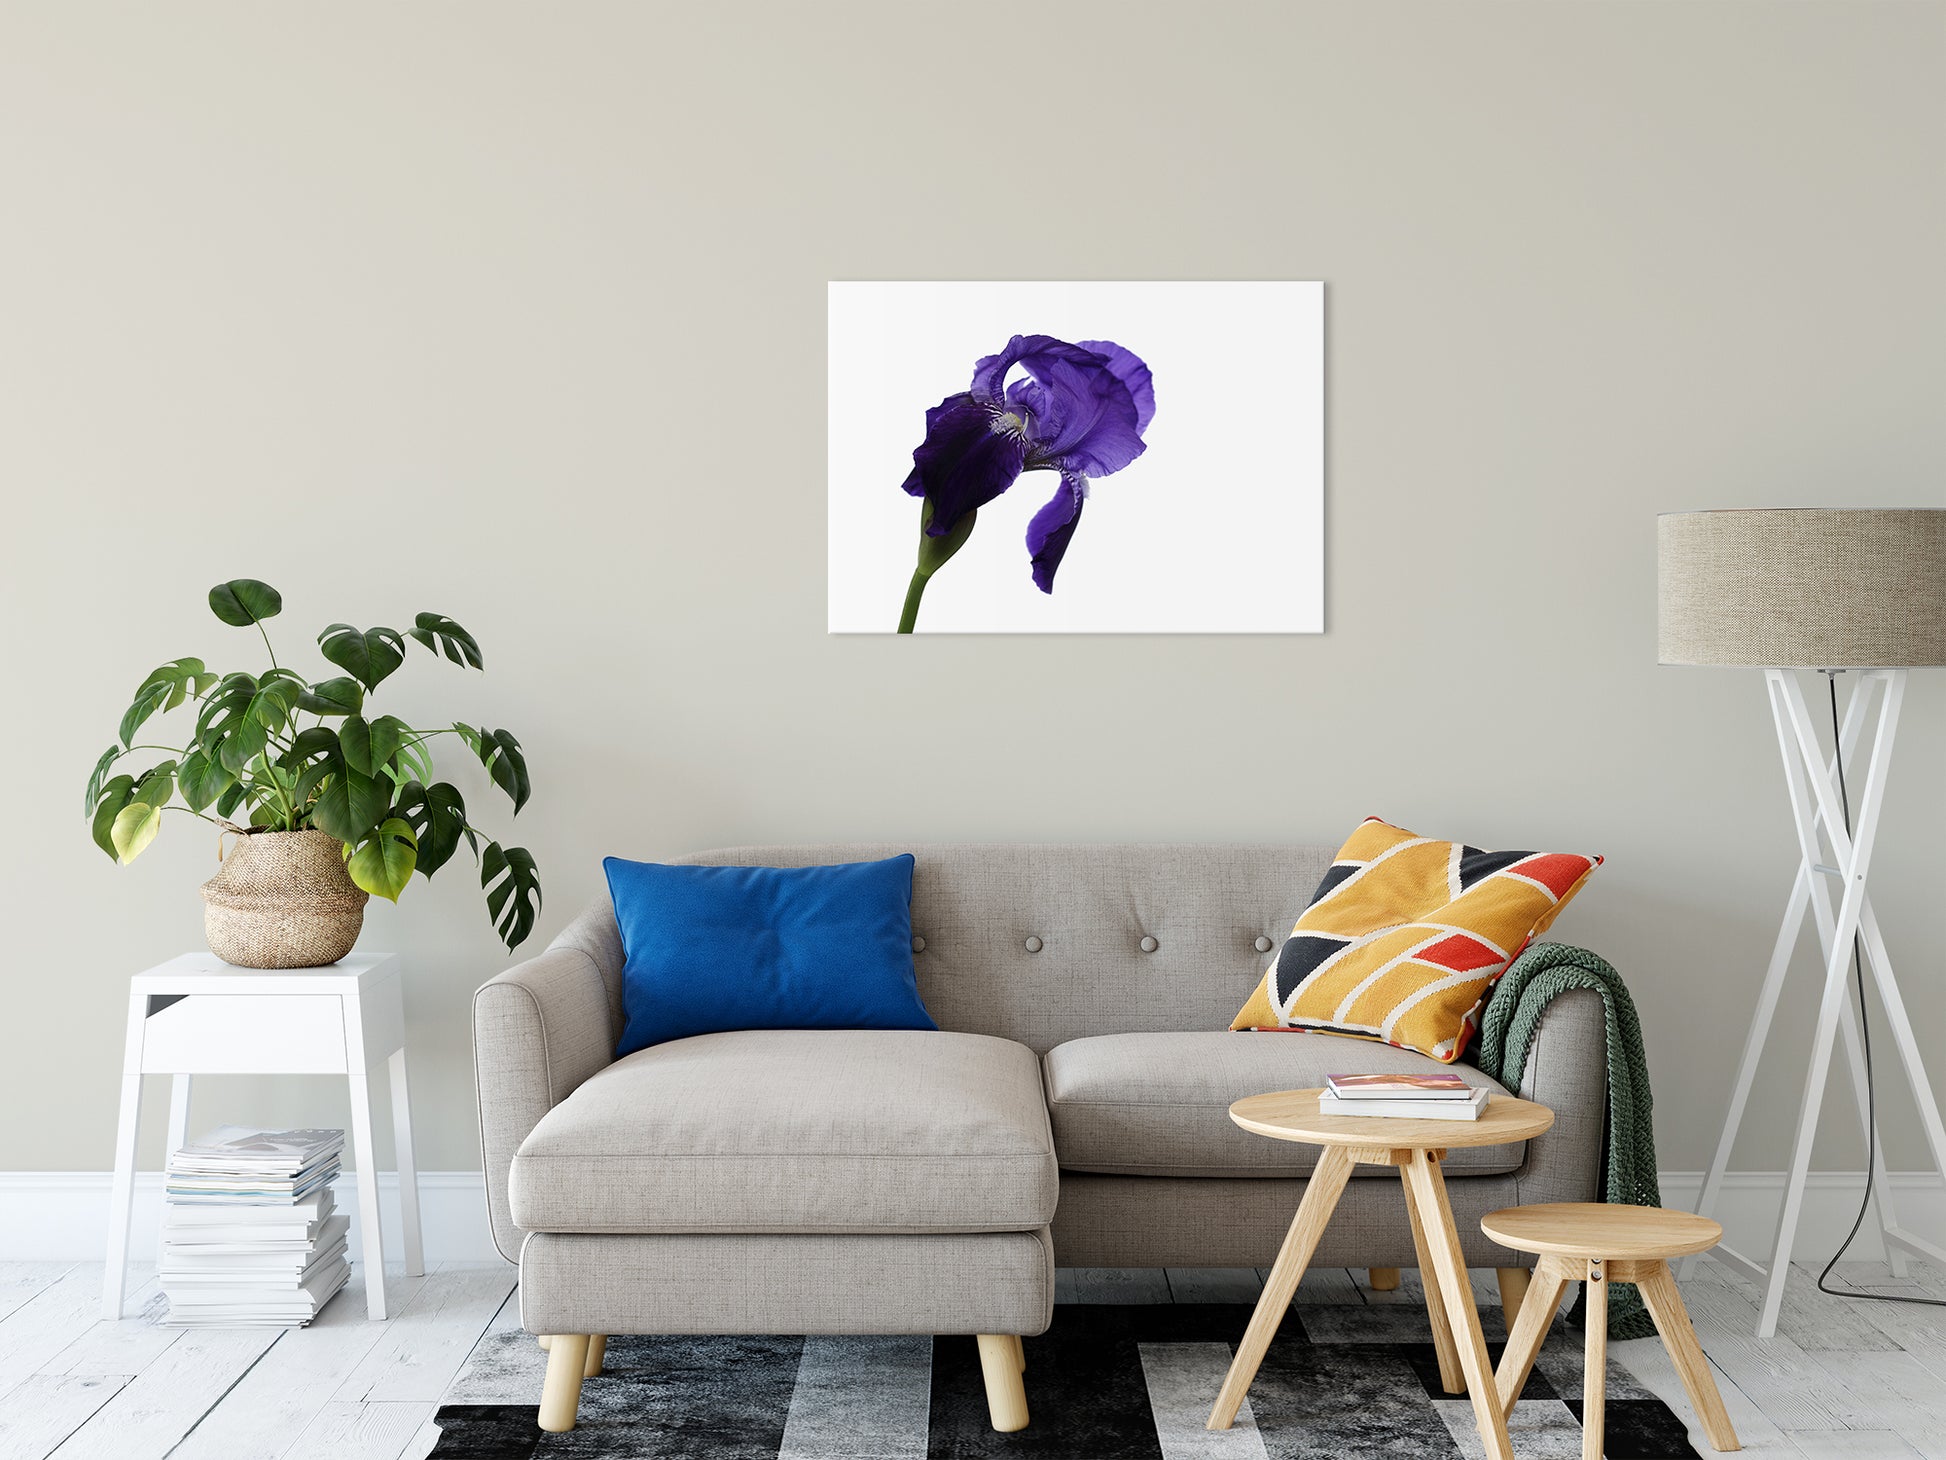 Iris On White Nature / Floral Photo Fine Art Canvas Wall Art Prints 24" x 36" - PIPAFINEART